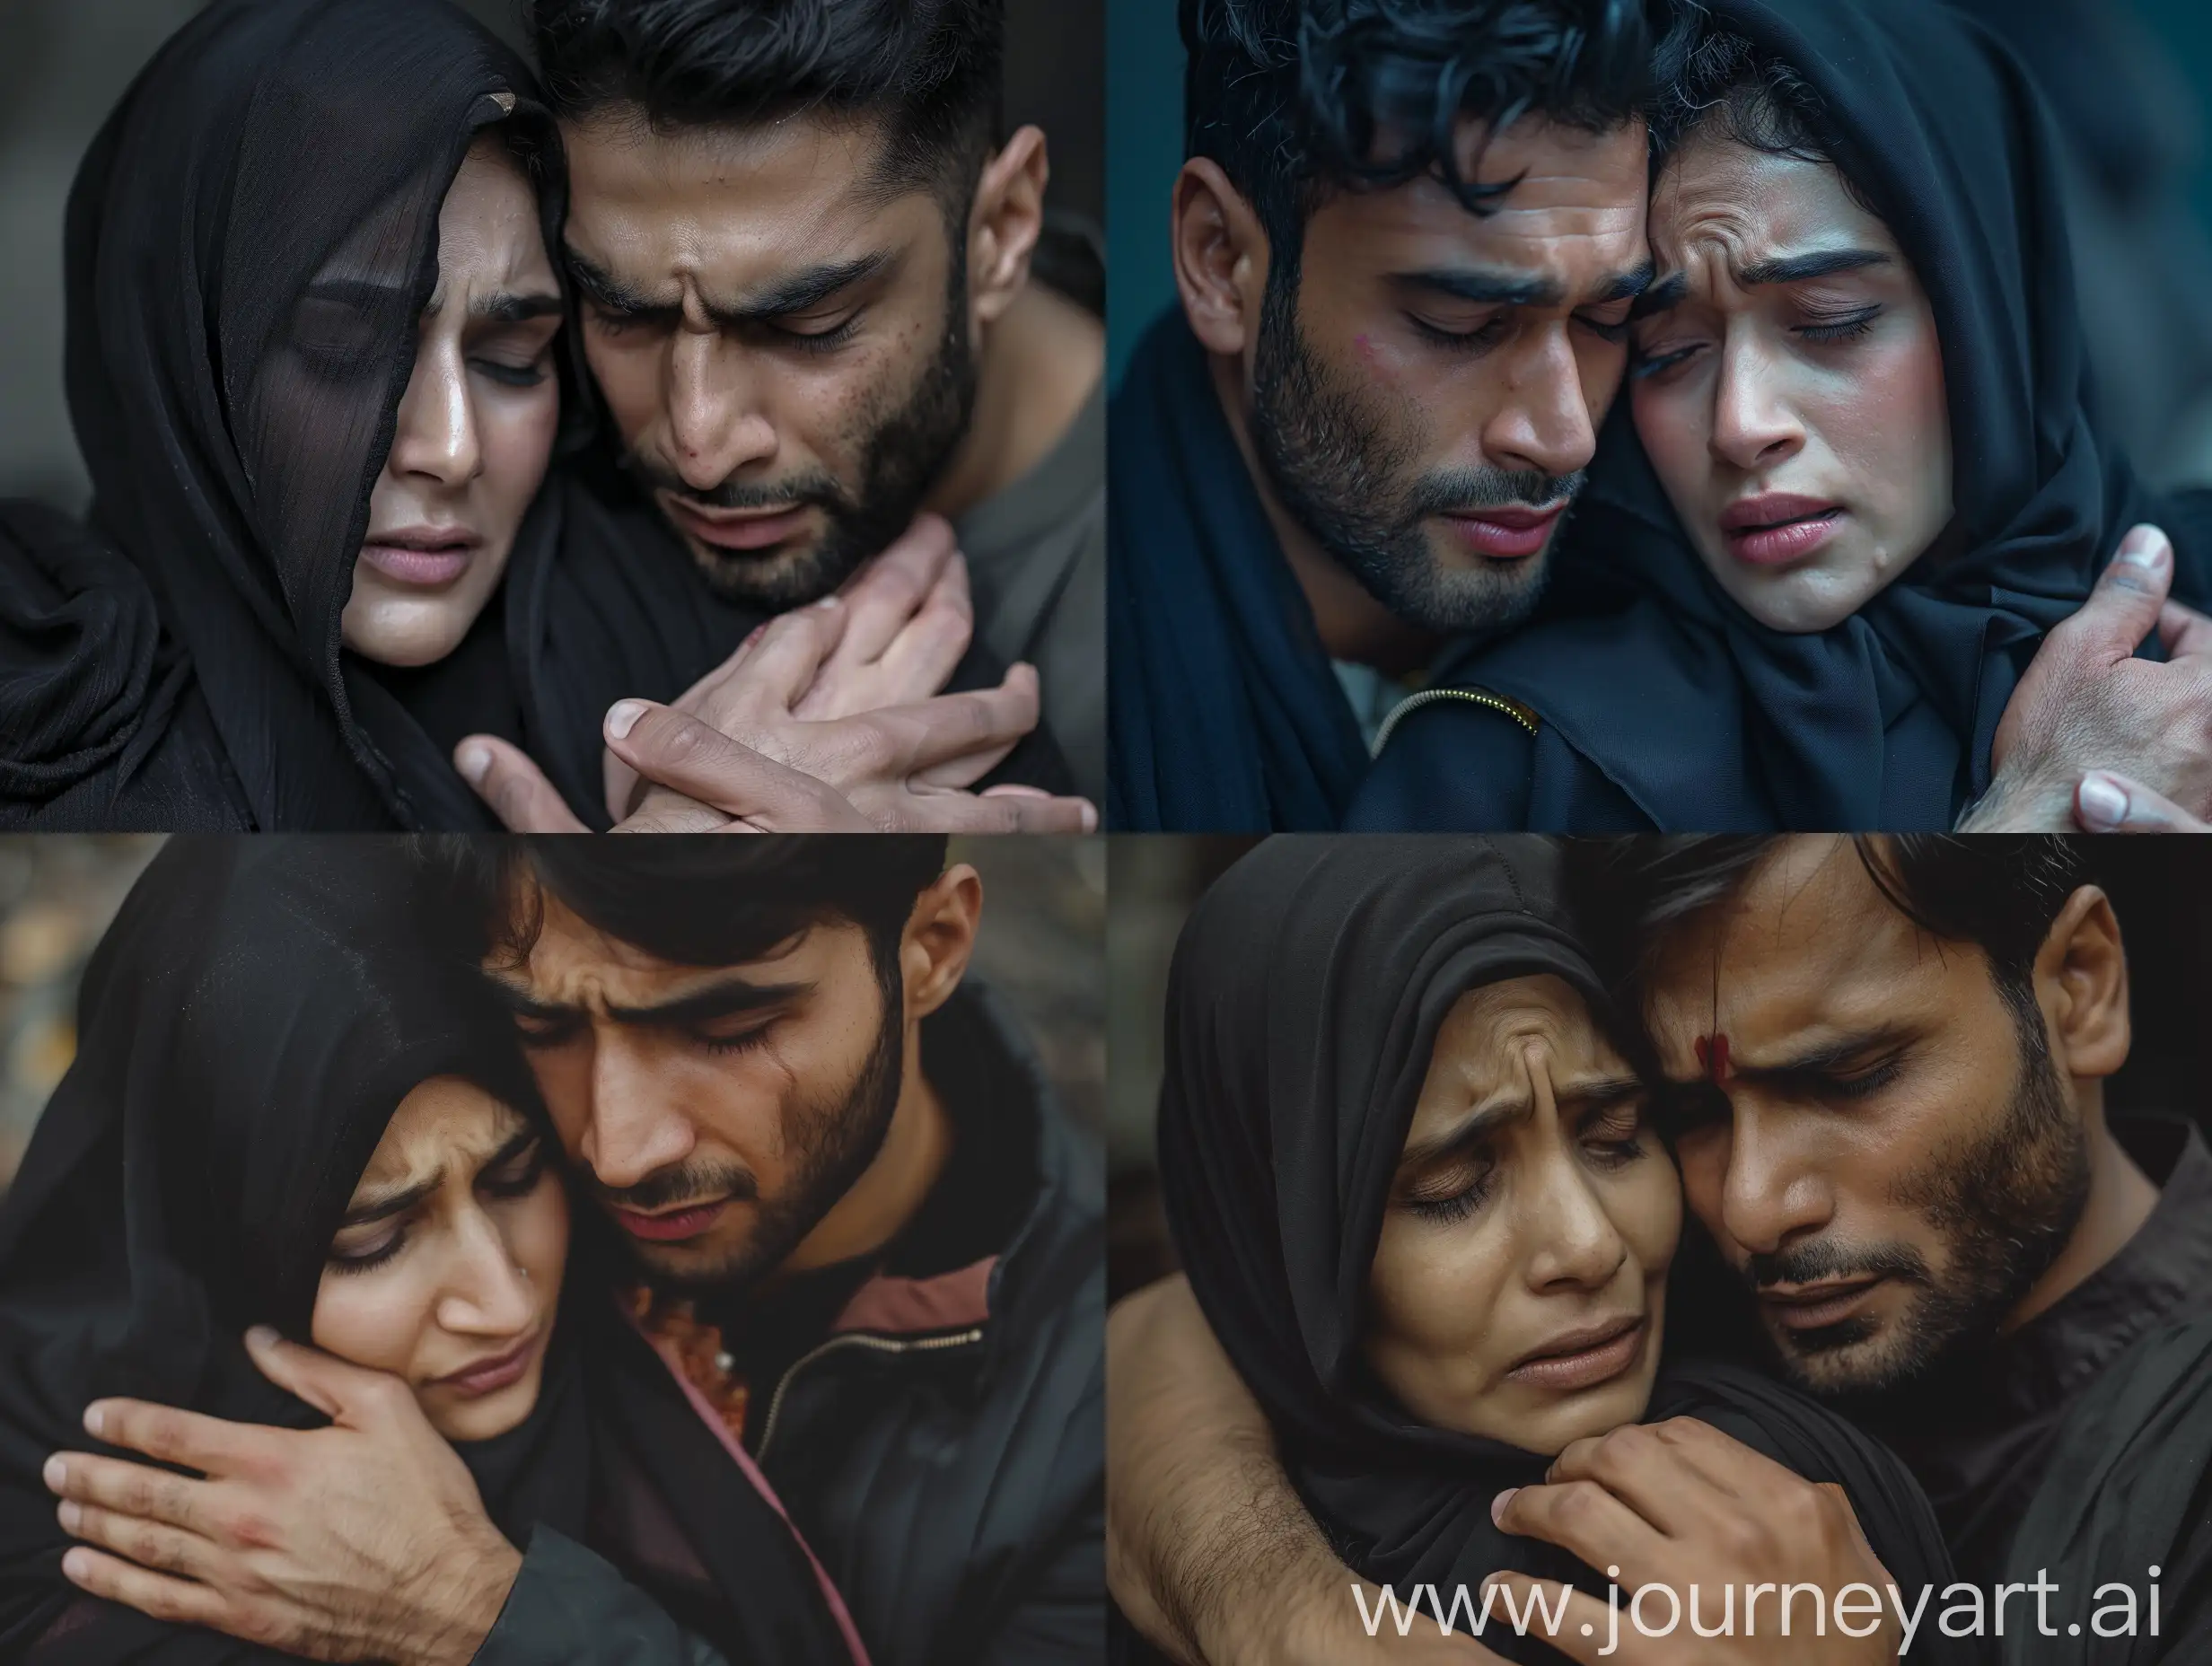 real features a close-up shot of a handsome indian Hindu man and his indian Muslim wife. The man is holding his wife, who wears a black hijab, tightly and comforting her while she cries on his shoulder. The scene is captured in a dark and somber setting, symbolizing the tragedy and darkness that surrounds their story. 